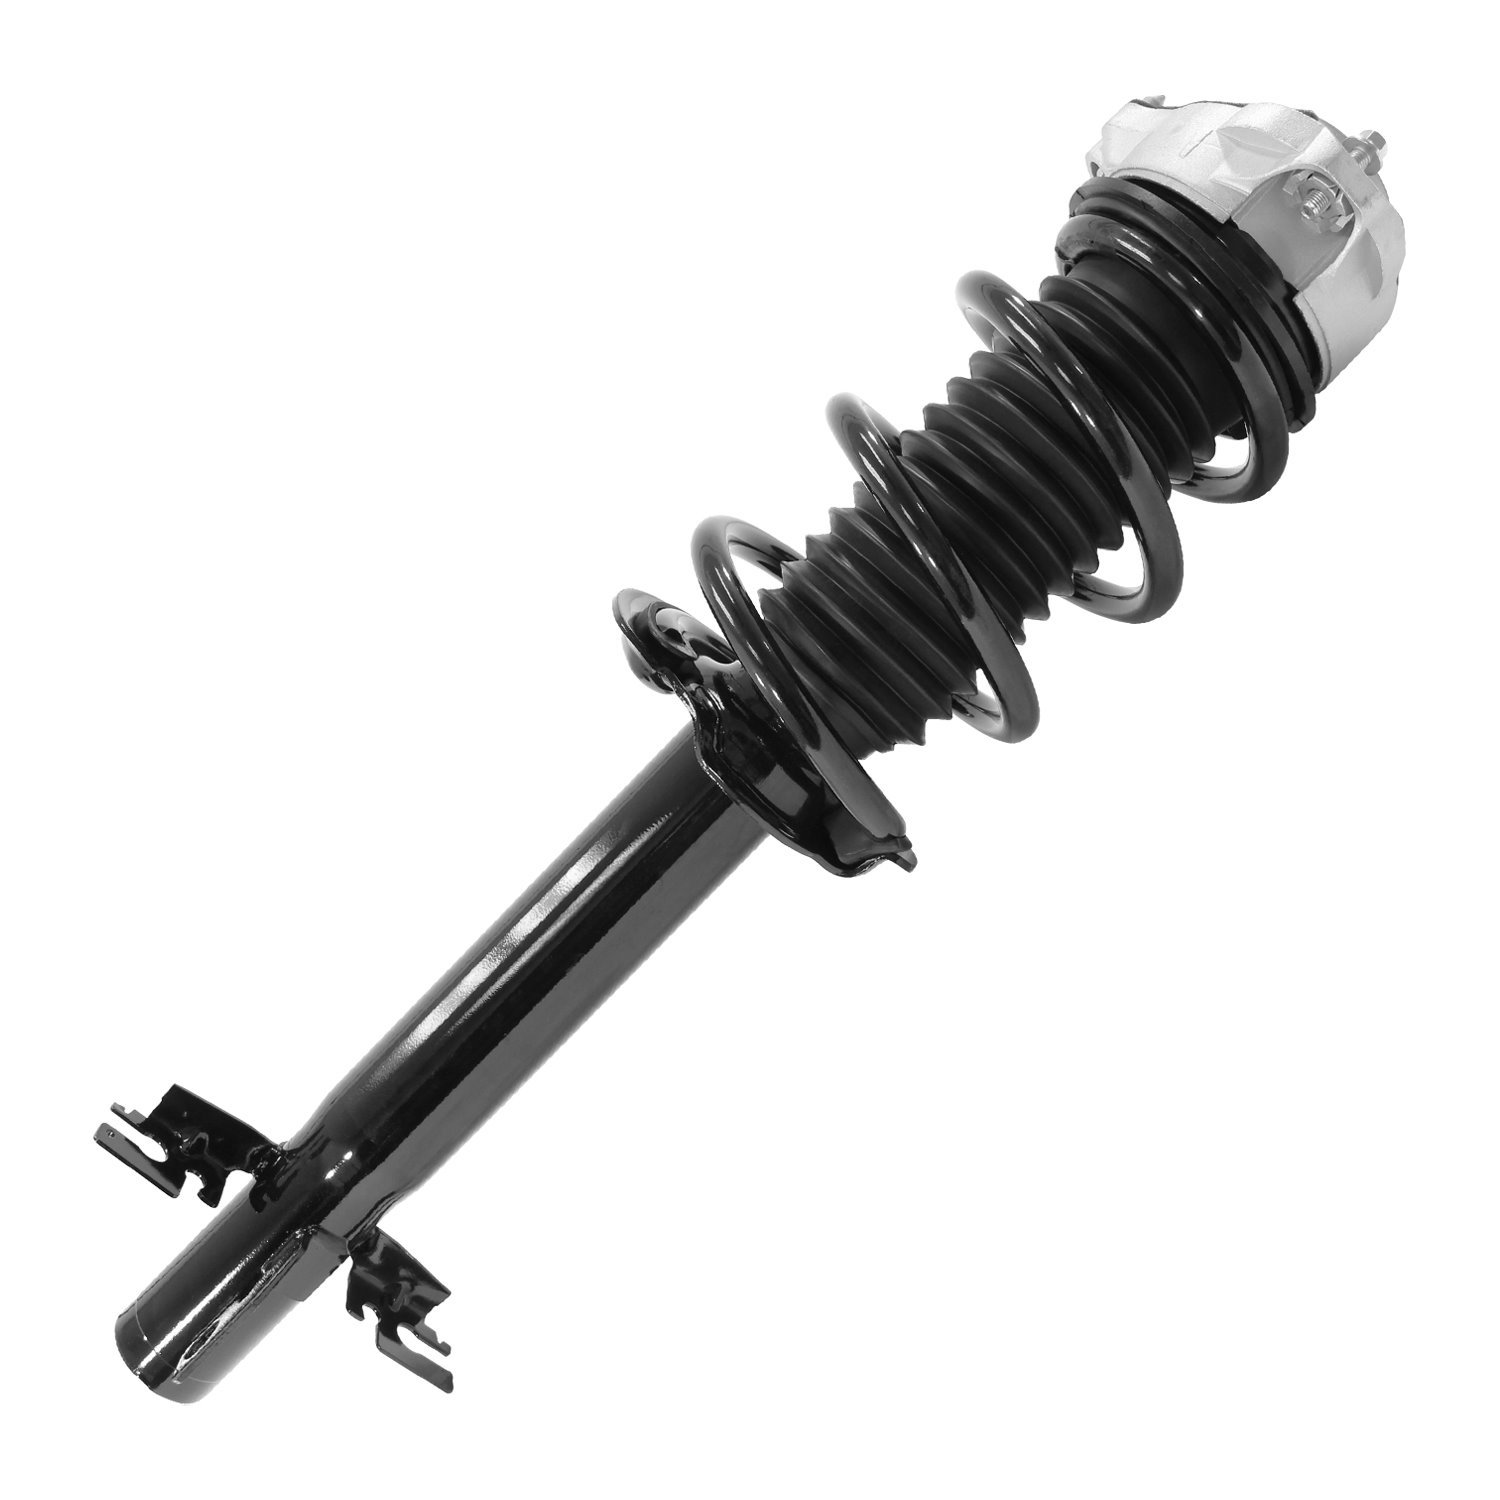 13422 Front Suspension Strut & Coil Spring Assemby Fits Select Ram ProMaster 1500, Ram ProMaster 2500, Ram ProMaster 3500